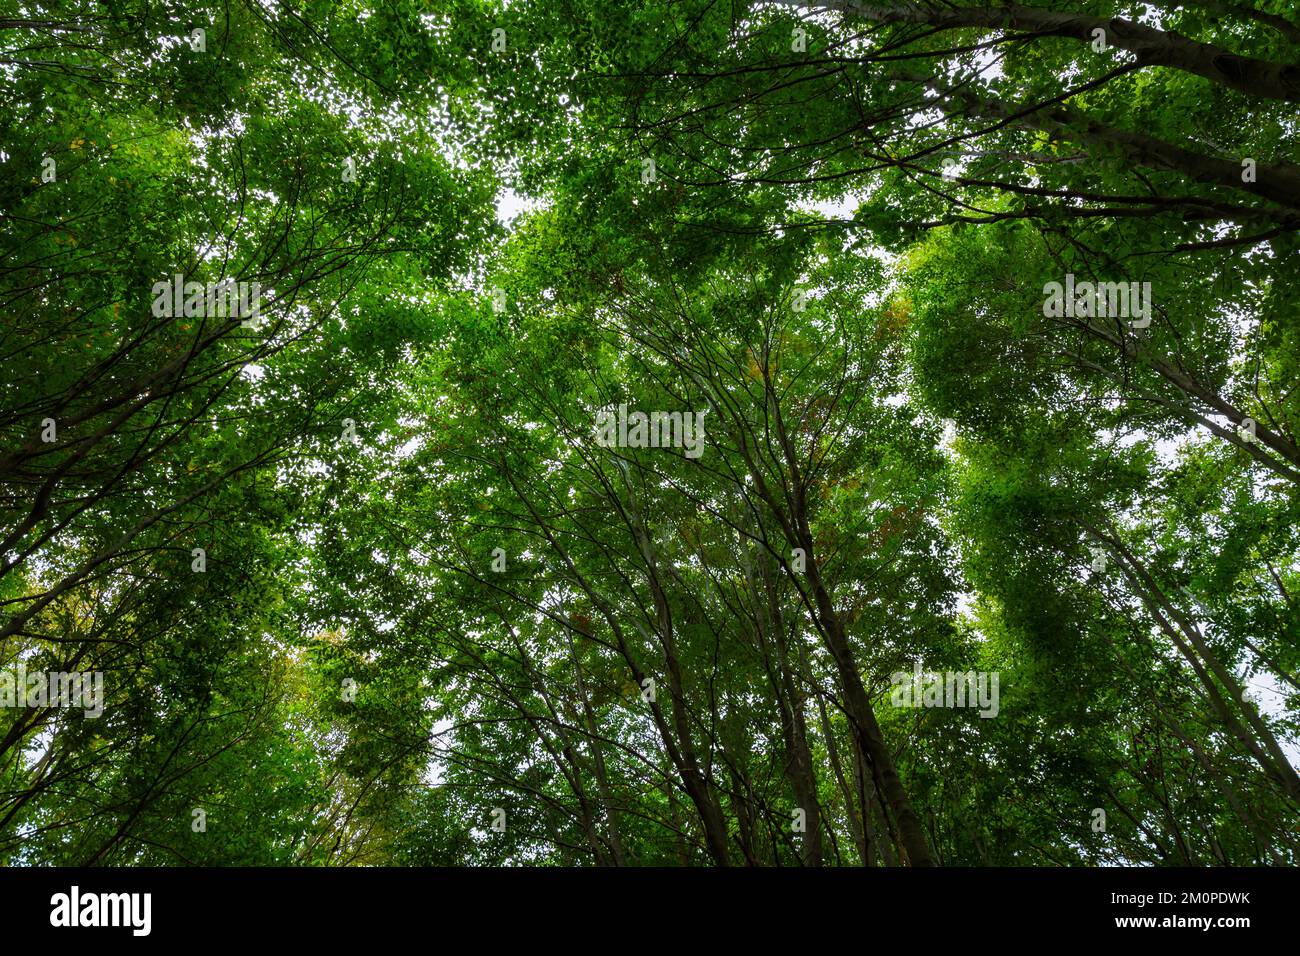 Forest view. Lush forest background. Carbon neutrality or carbon net zero concept. Stock Photo